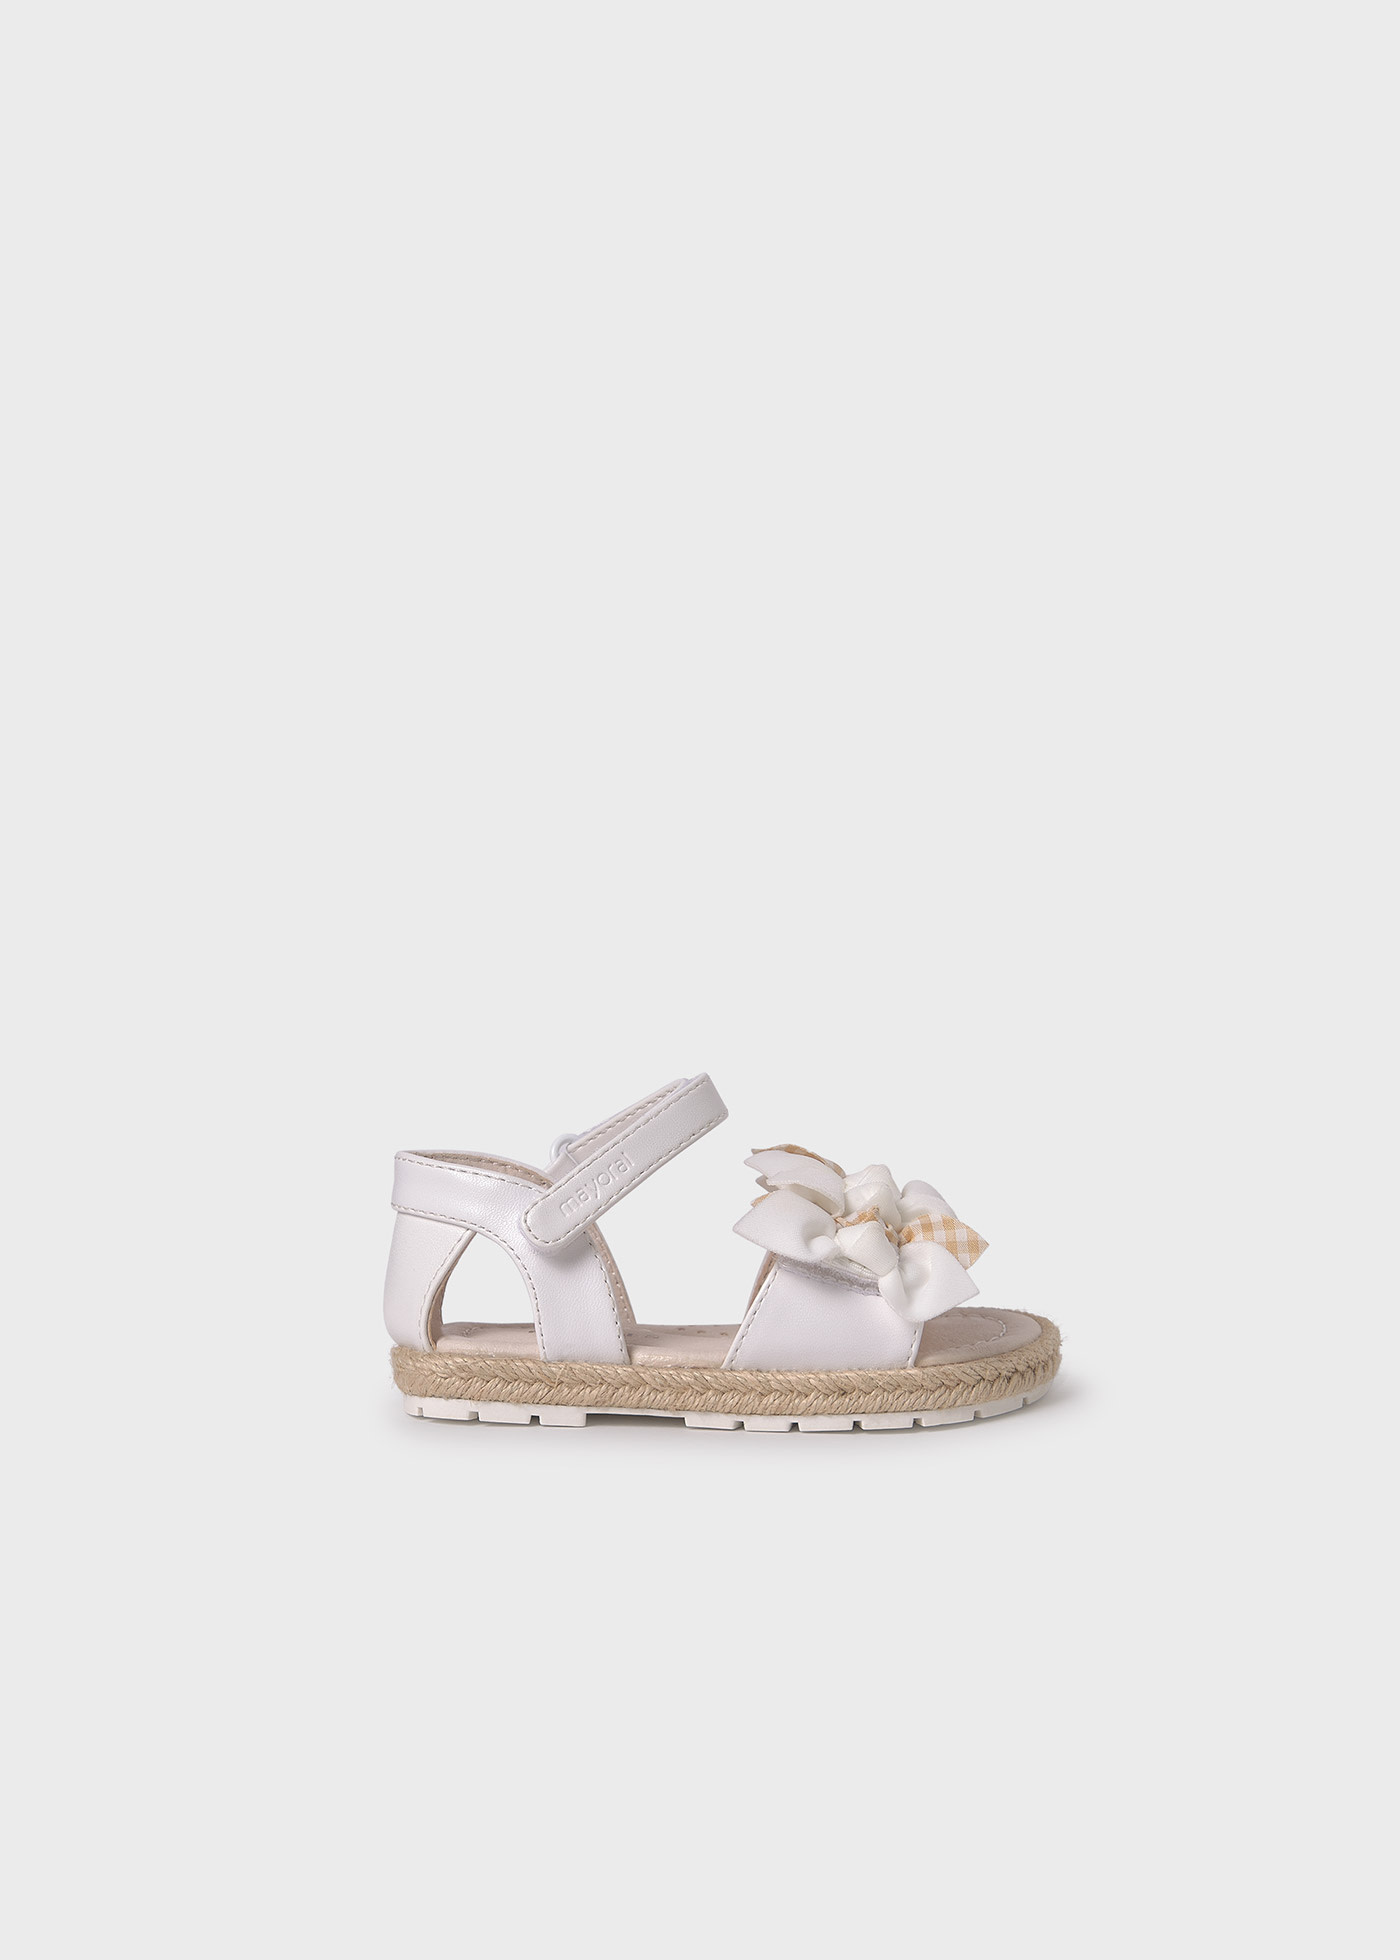 Baby Jute Sandals Sustainable Leather